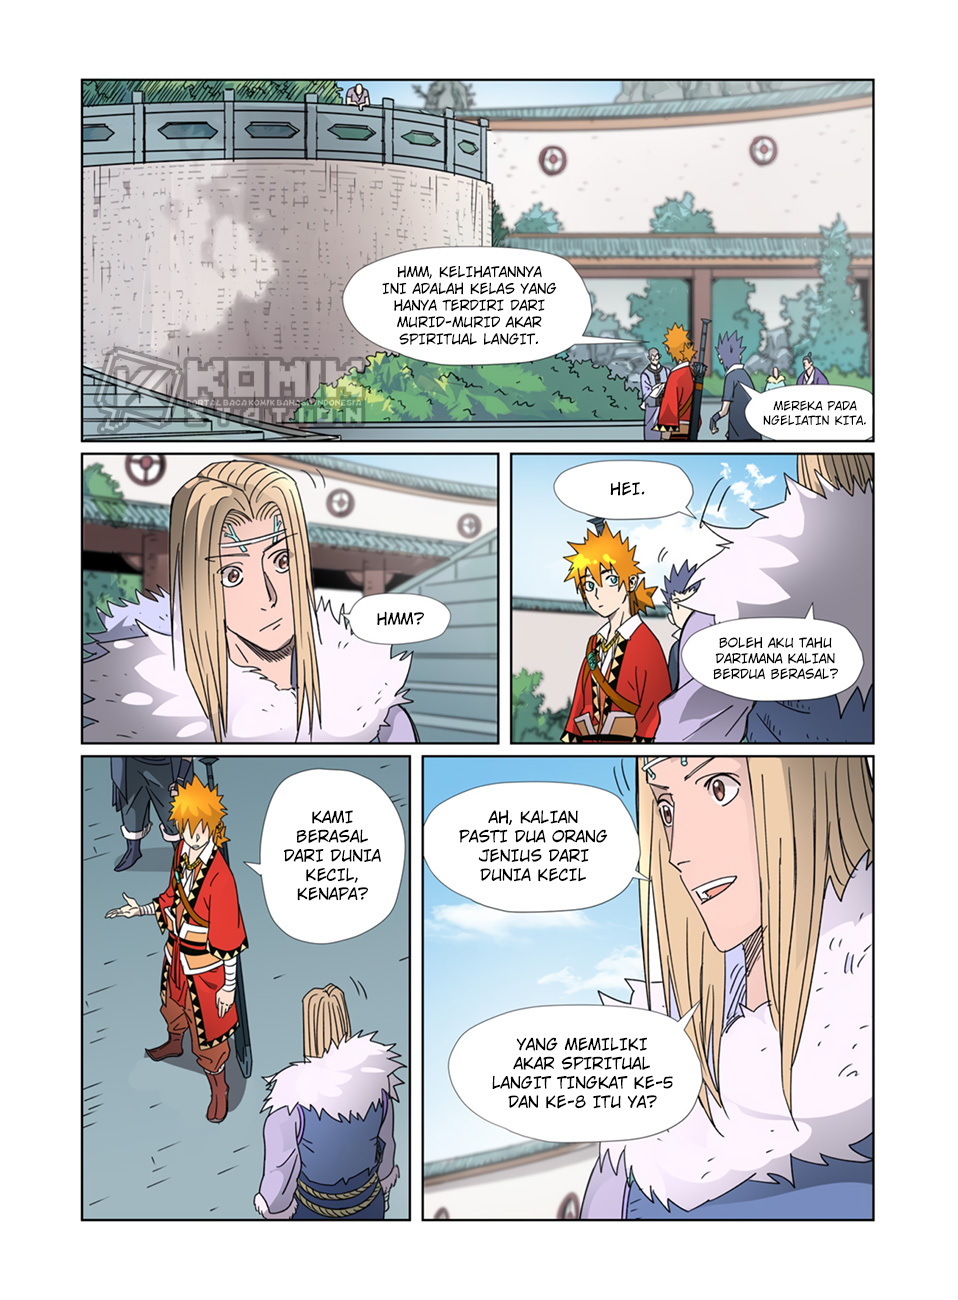 Tales of Demons and Gods Chapter 304-5